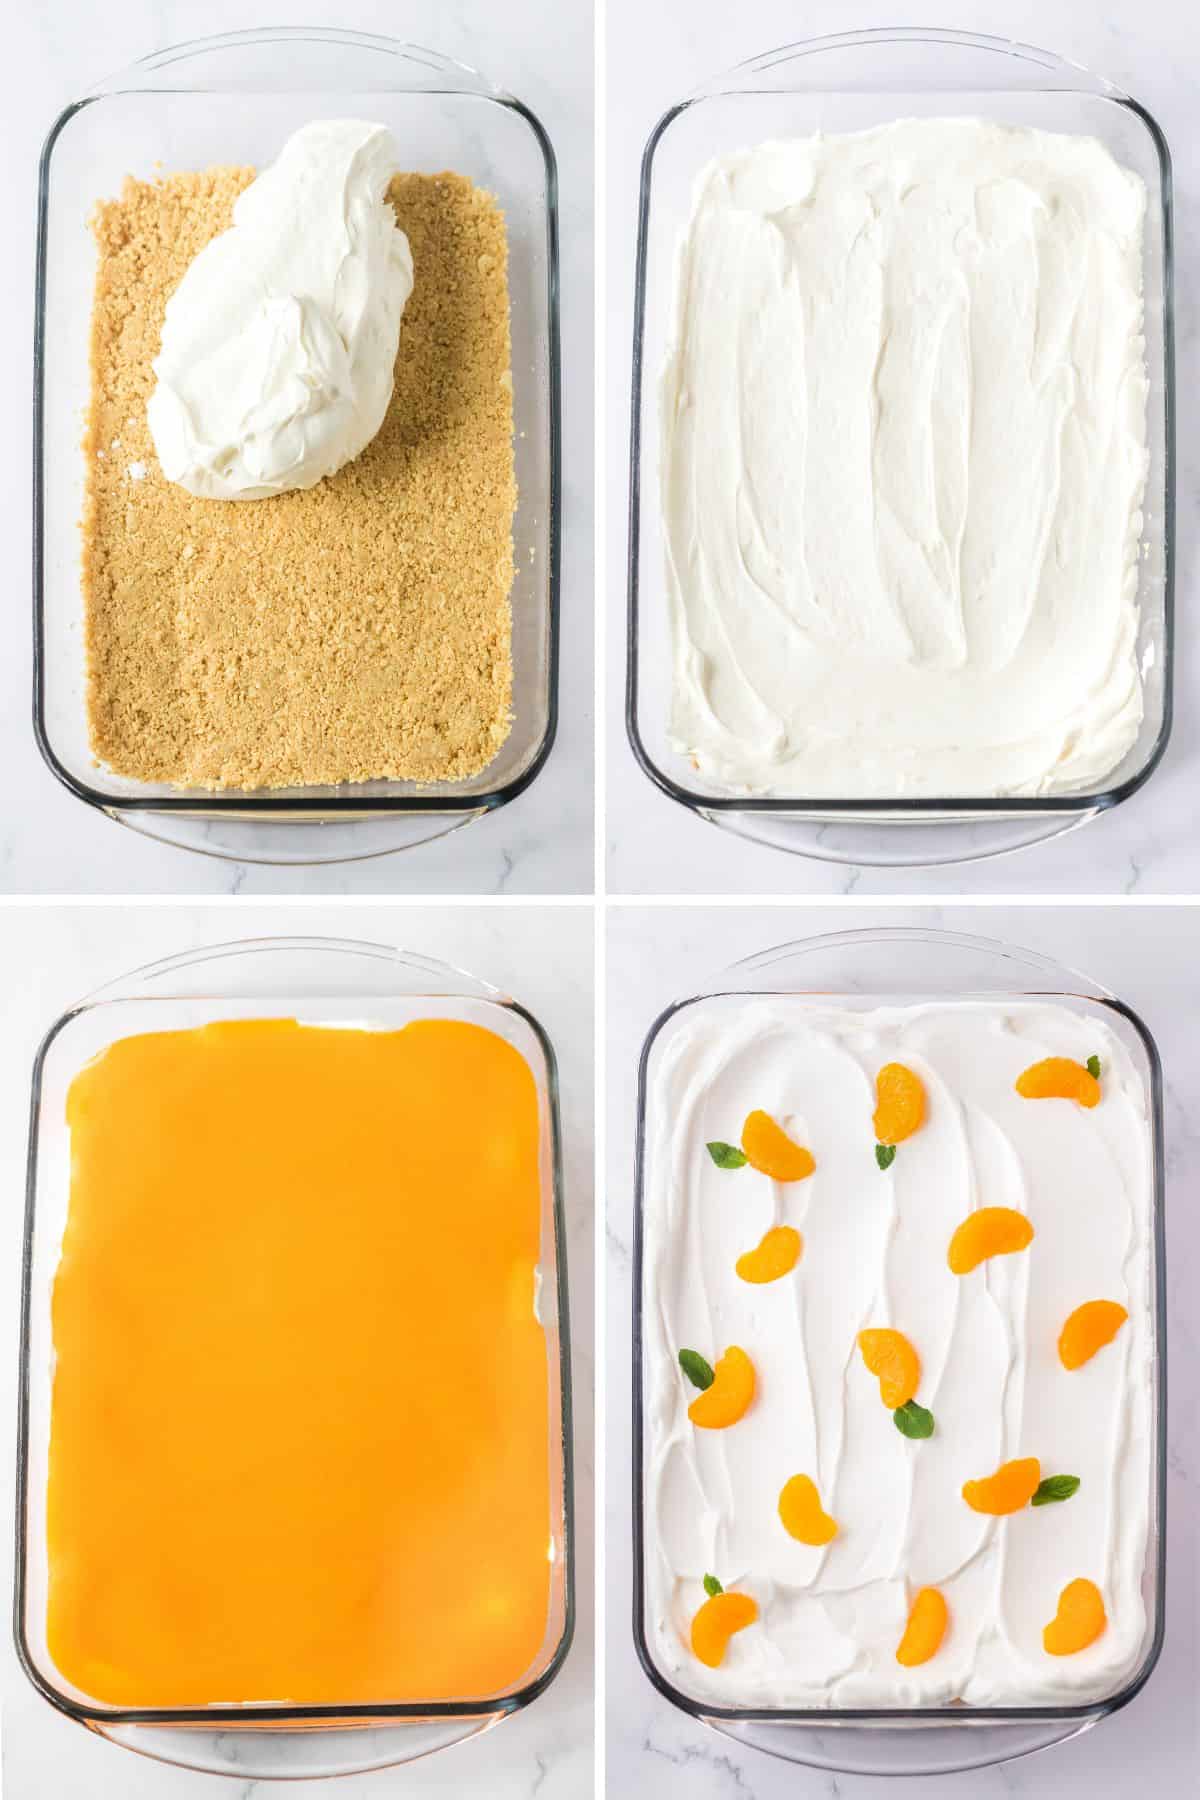 Four image collage of layers of orange creamsicle dessert: cookie crust, sweetened cream cheese layer, orange jello layer, and cool whip topped with mandarin oranges and fresh mint leaves.